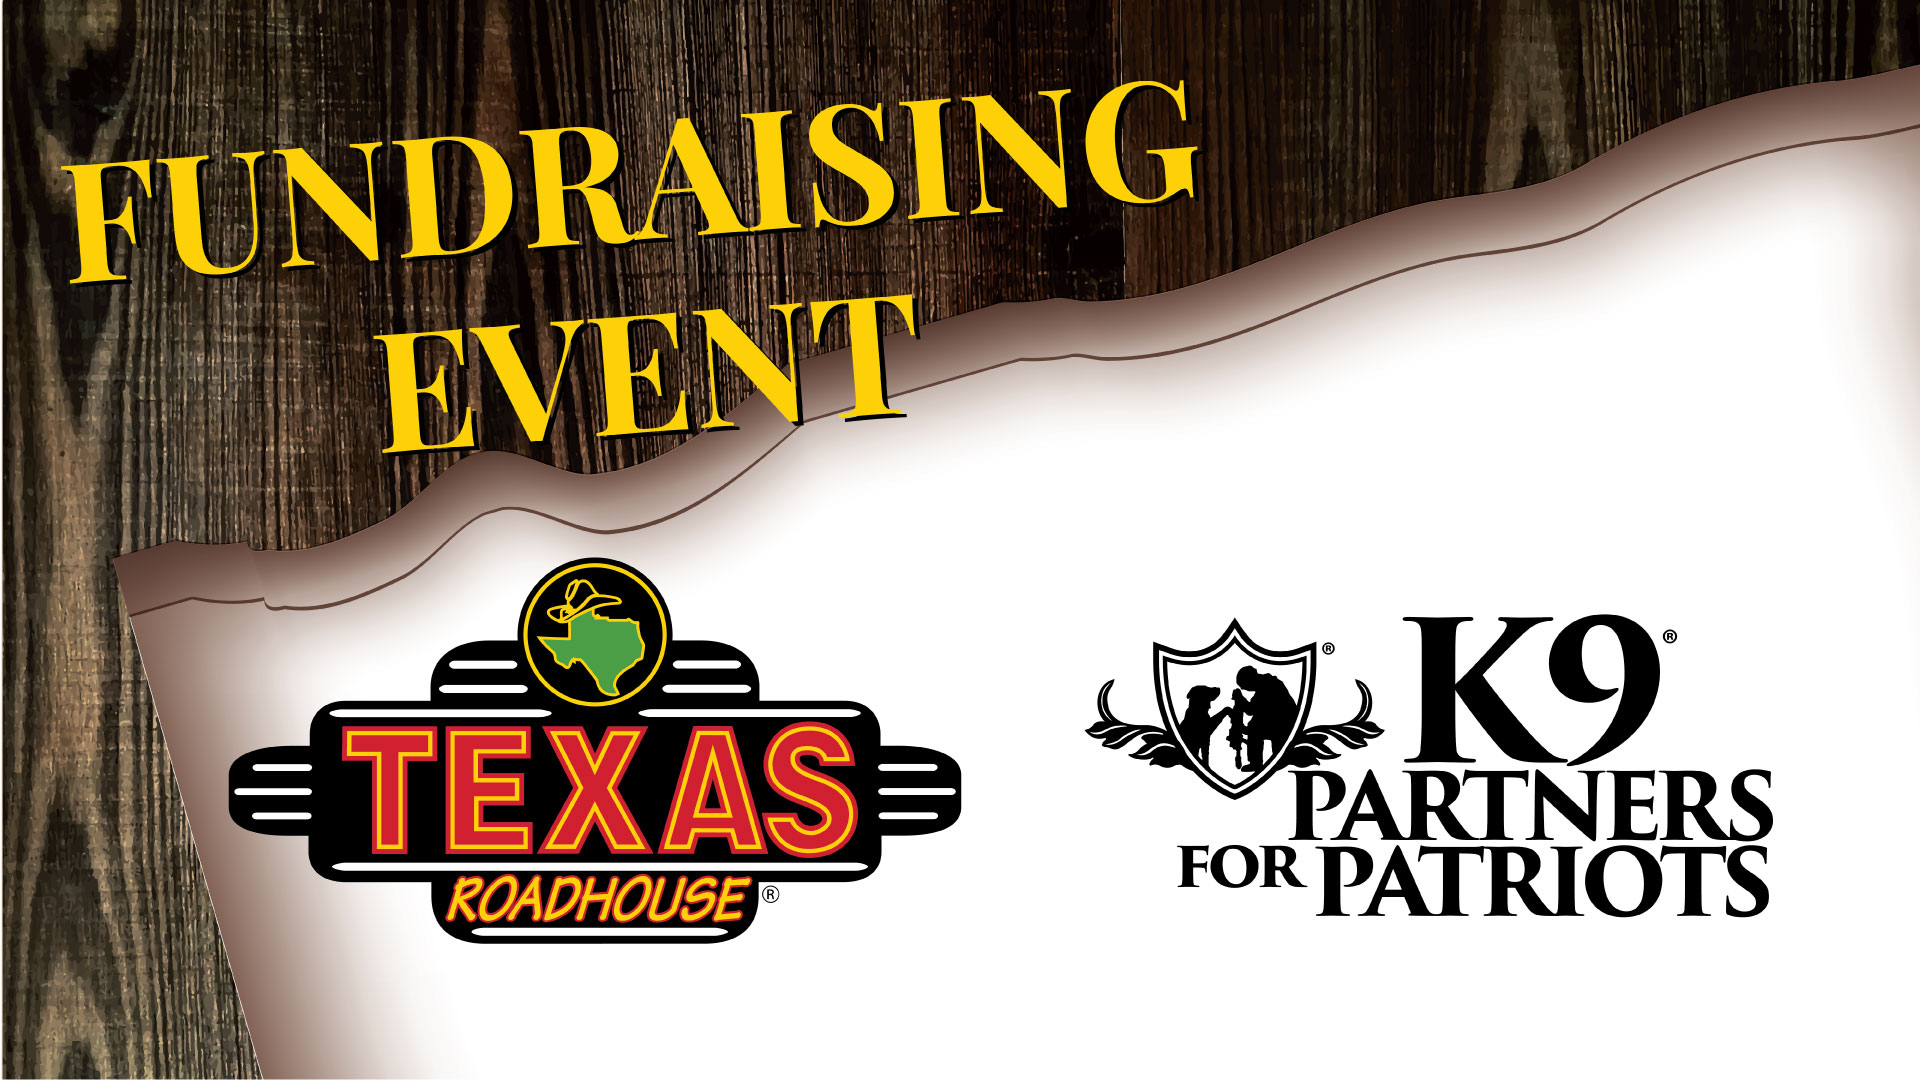 Texas Roadhouse Fundraiser for K9 Partners for Patriots